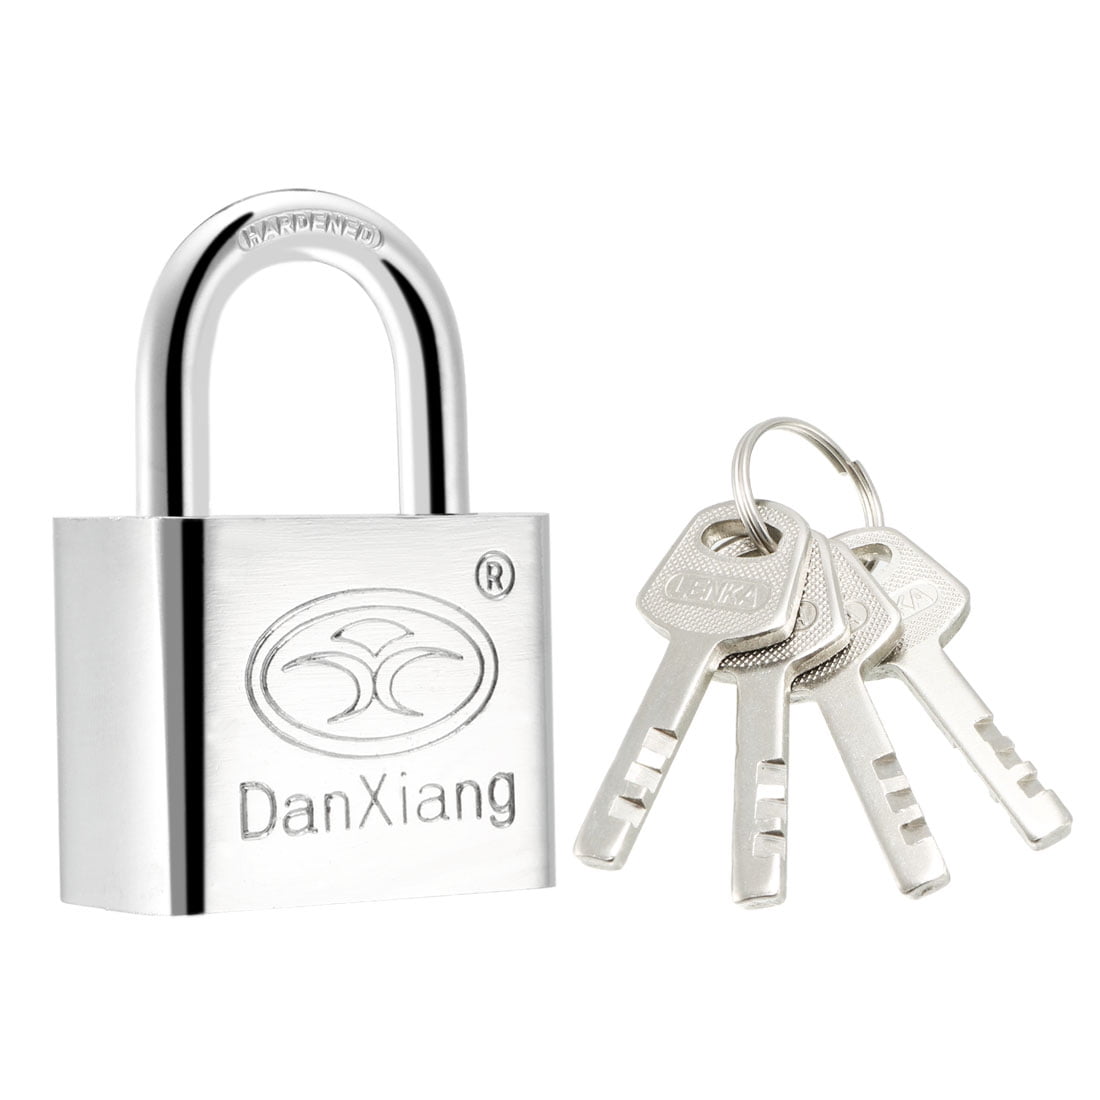 Keyed Different 40mm Wide Body Chrome Finish Harden Shackle Details about   Steel Padlock 